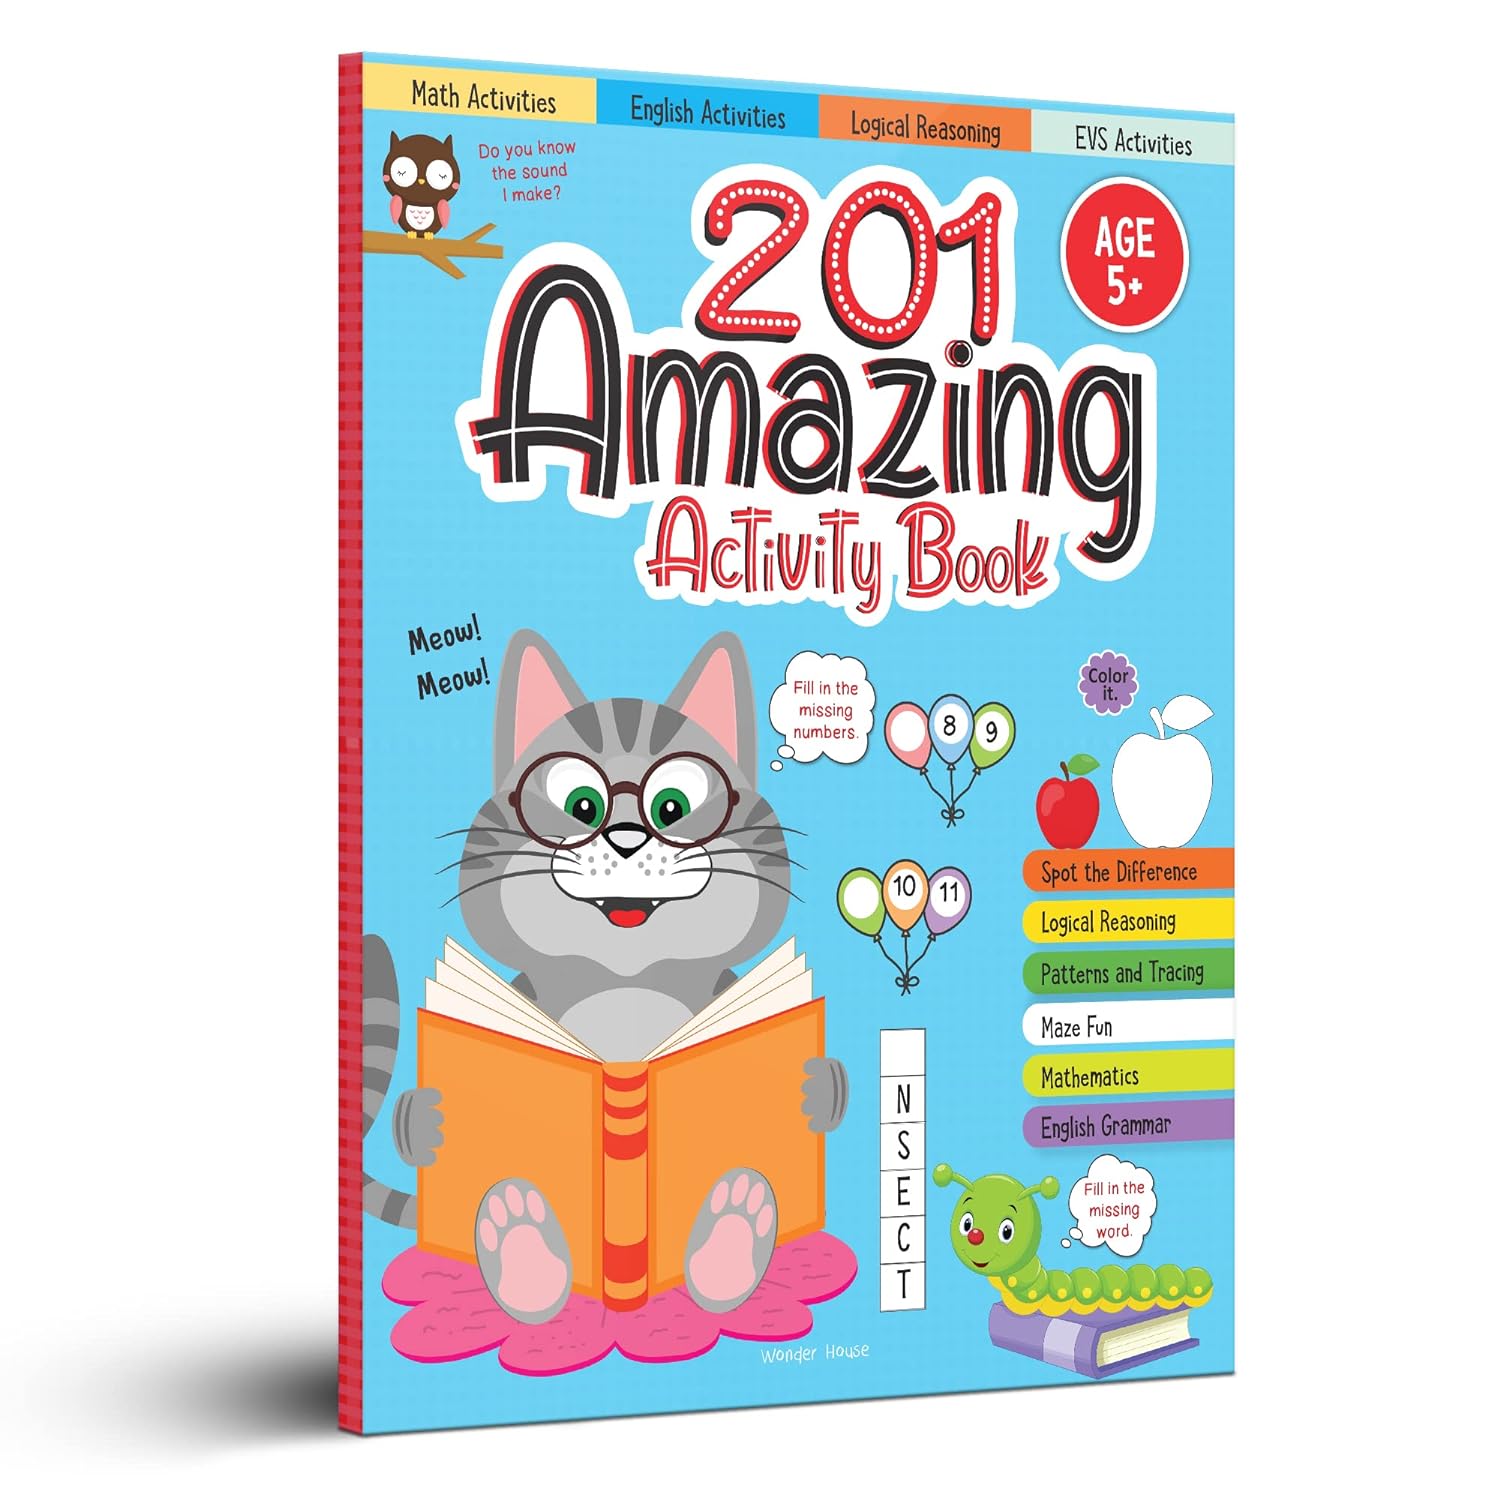 201 Amazing Activity Book for Age 5+